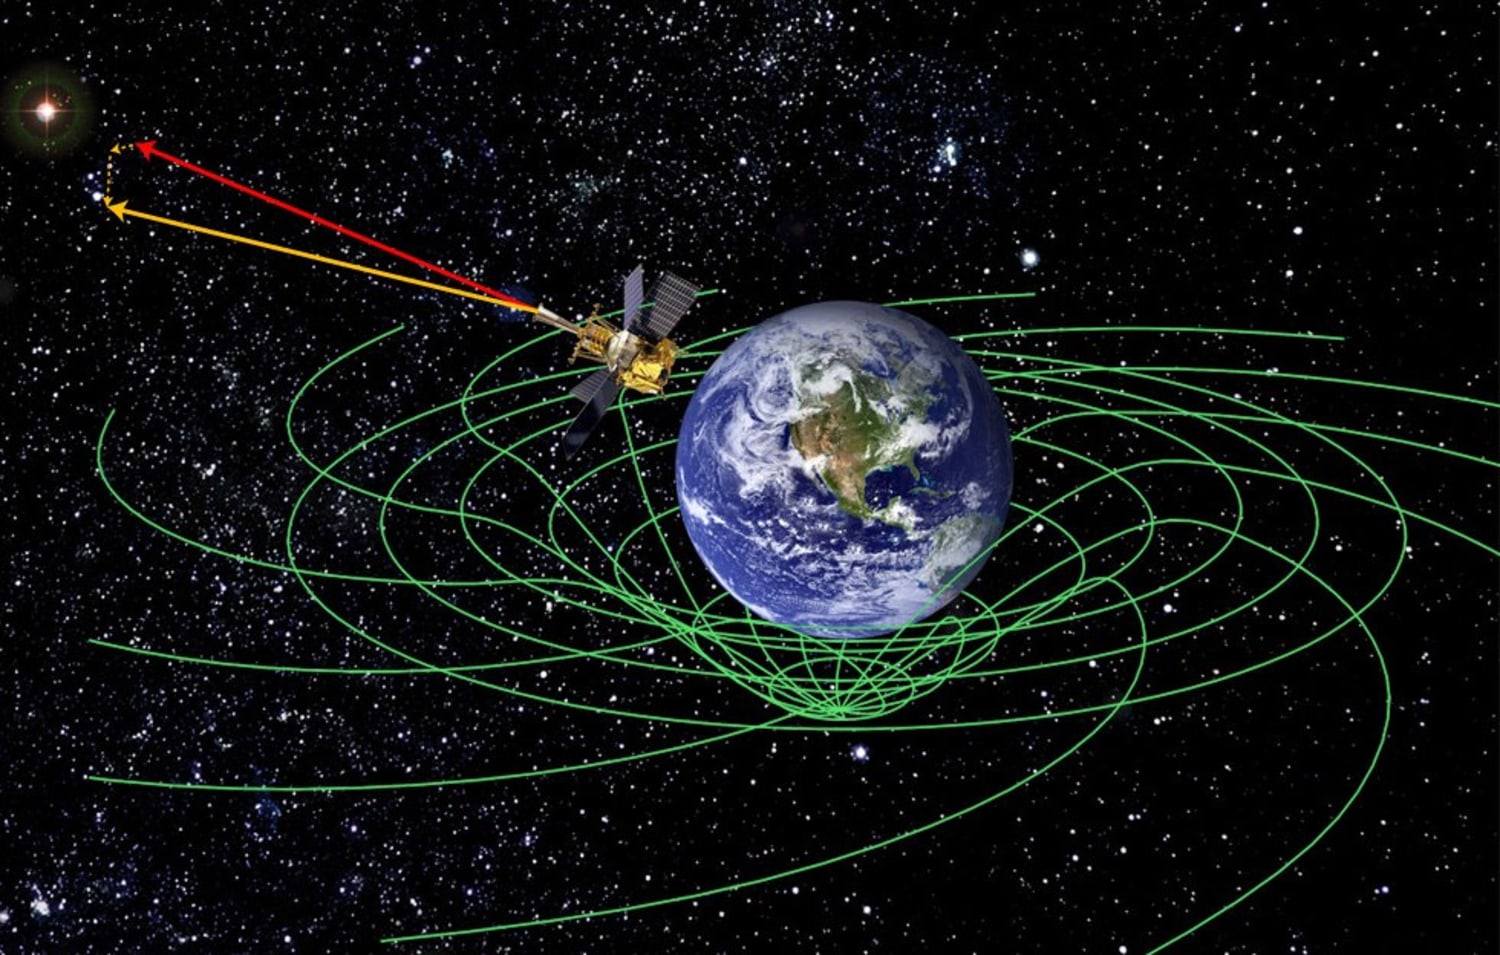 Satellite confirms that we live in a space-time warp